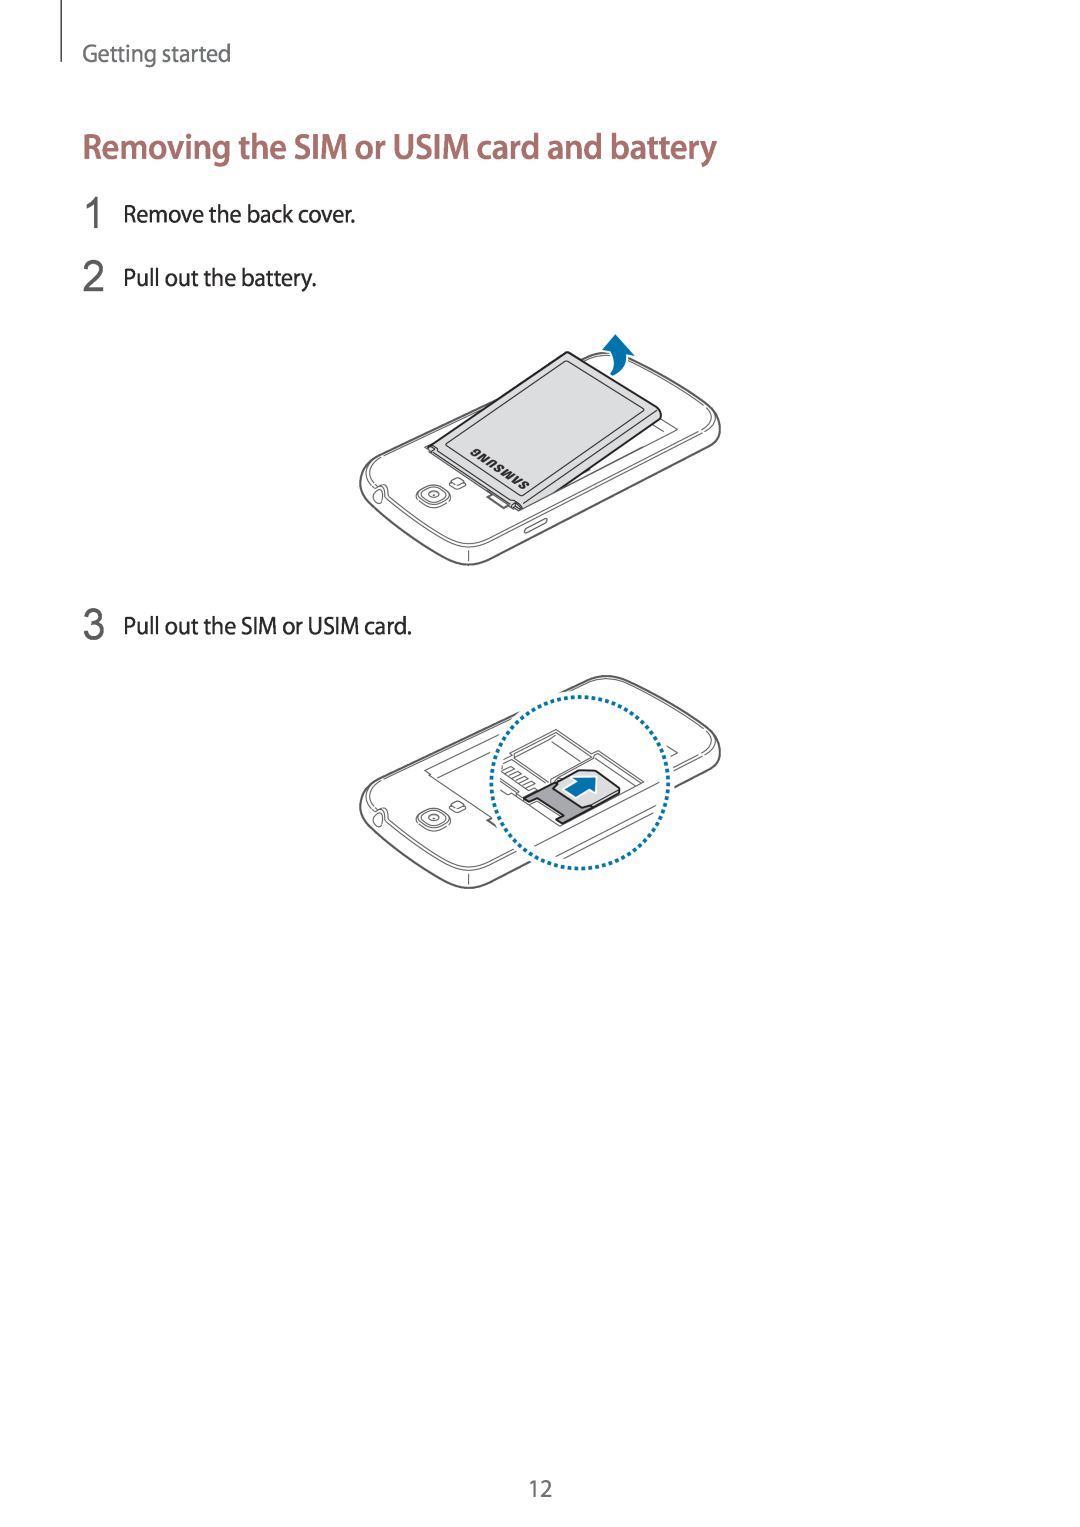 Samsung GT-I9195DKIATO manual Removing the SIM or USIM card and battery, Getting started, Pull out the SIM or USIM card 